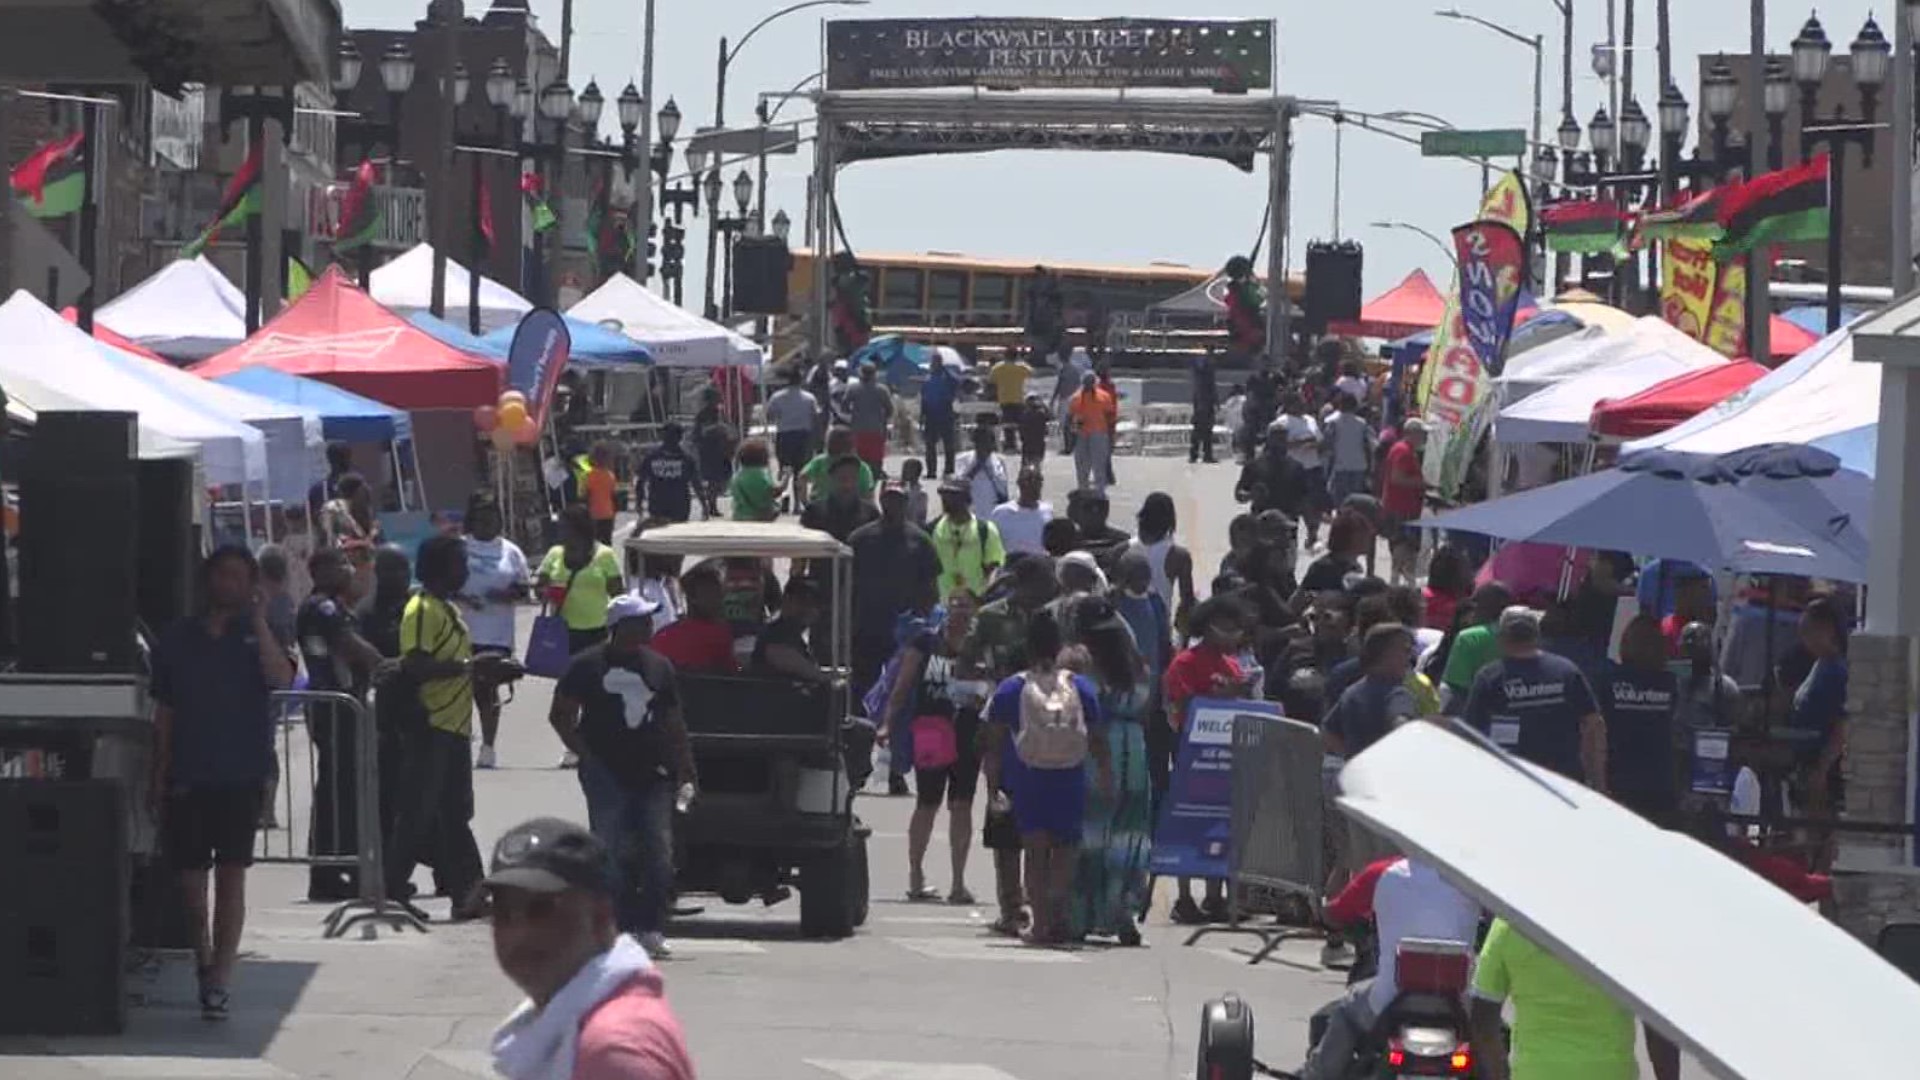 Tons of Black businesses lined up along the Historic Wellston Loop in North St. Louis on Saturday. They showed up for the annual Black Wall Street 314 Festival.